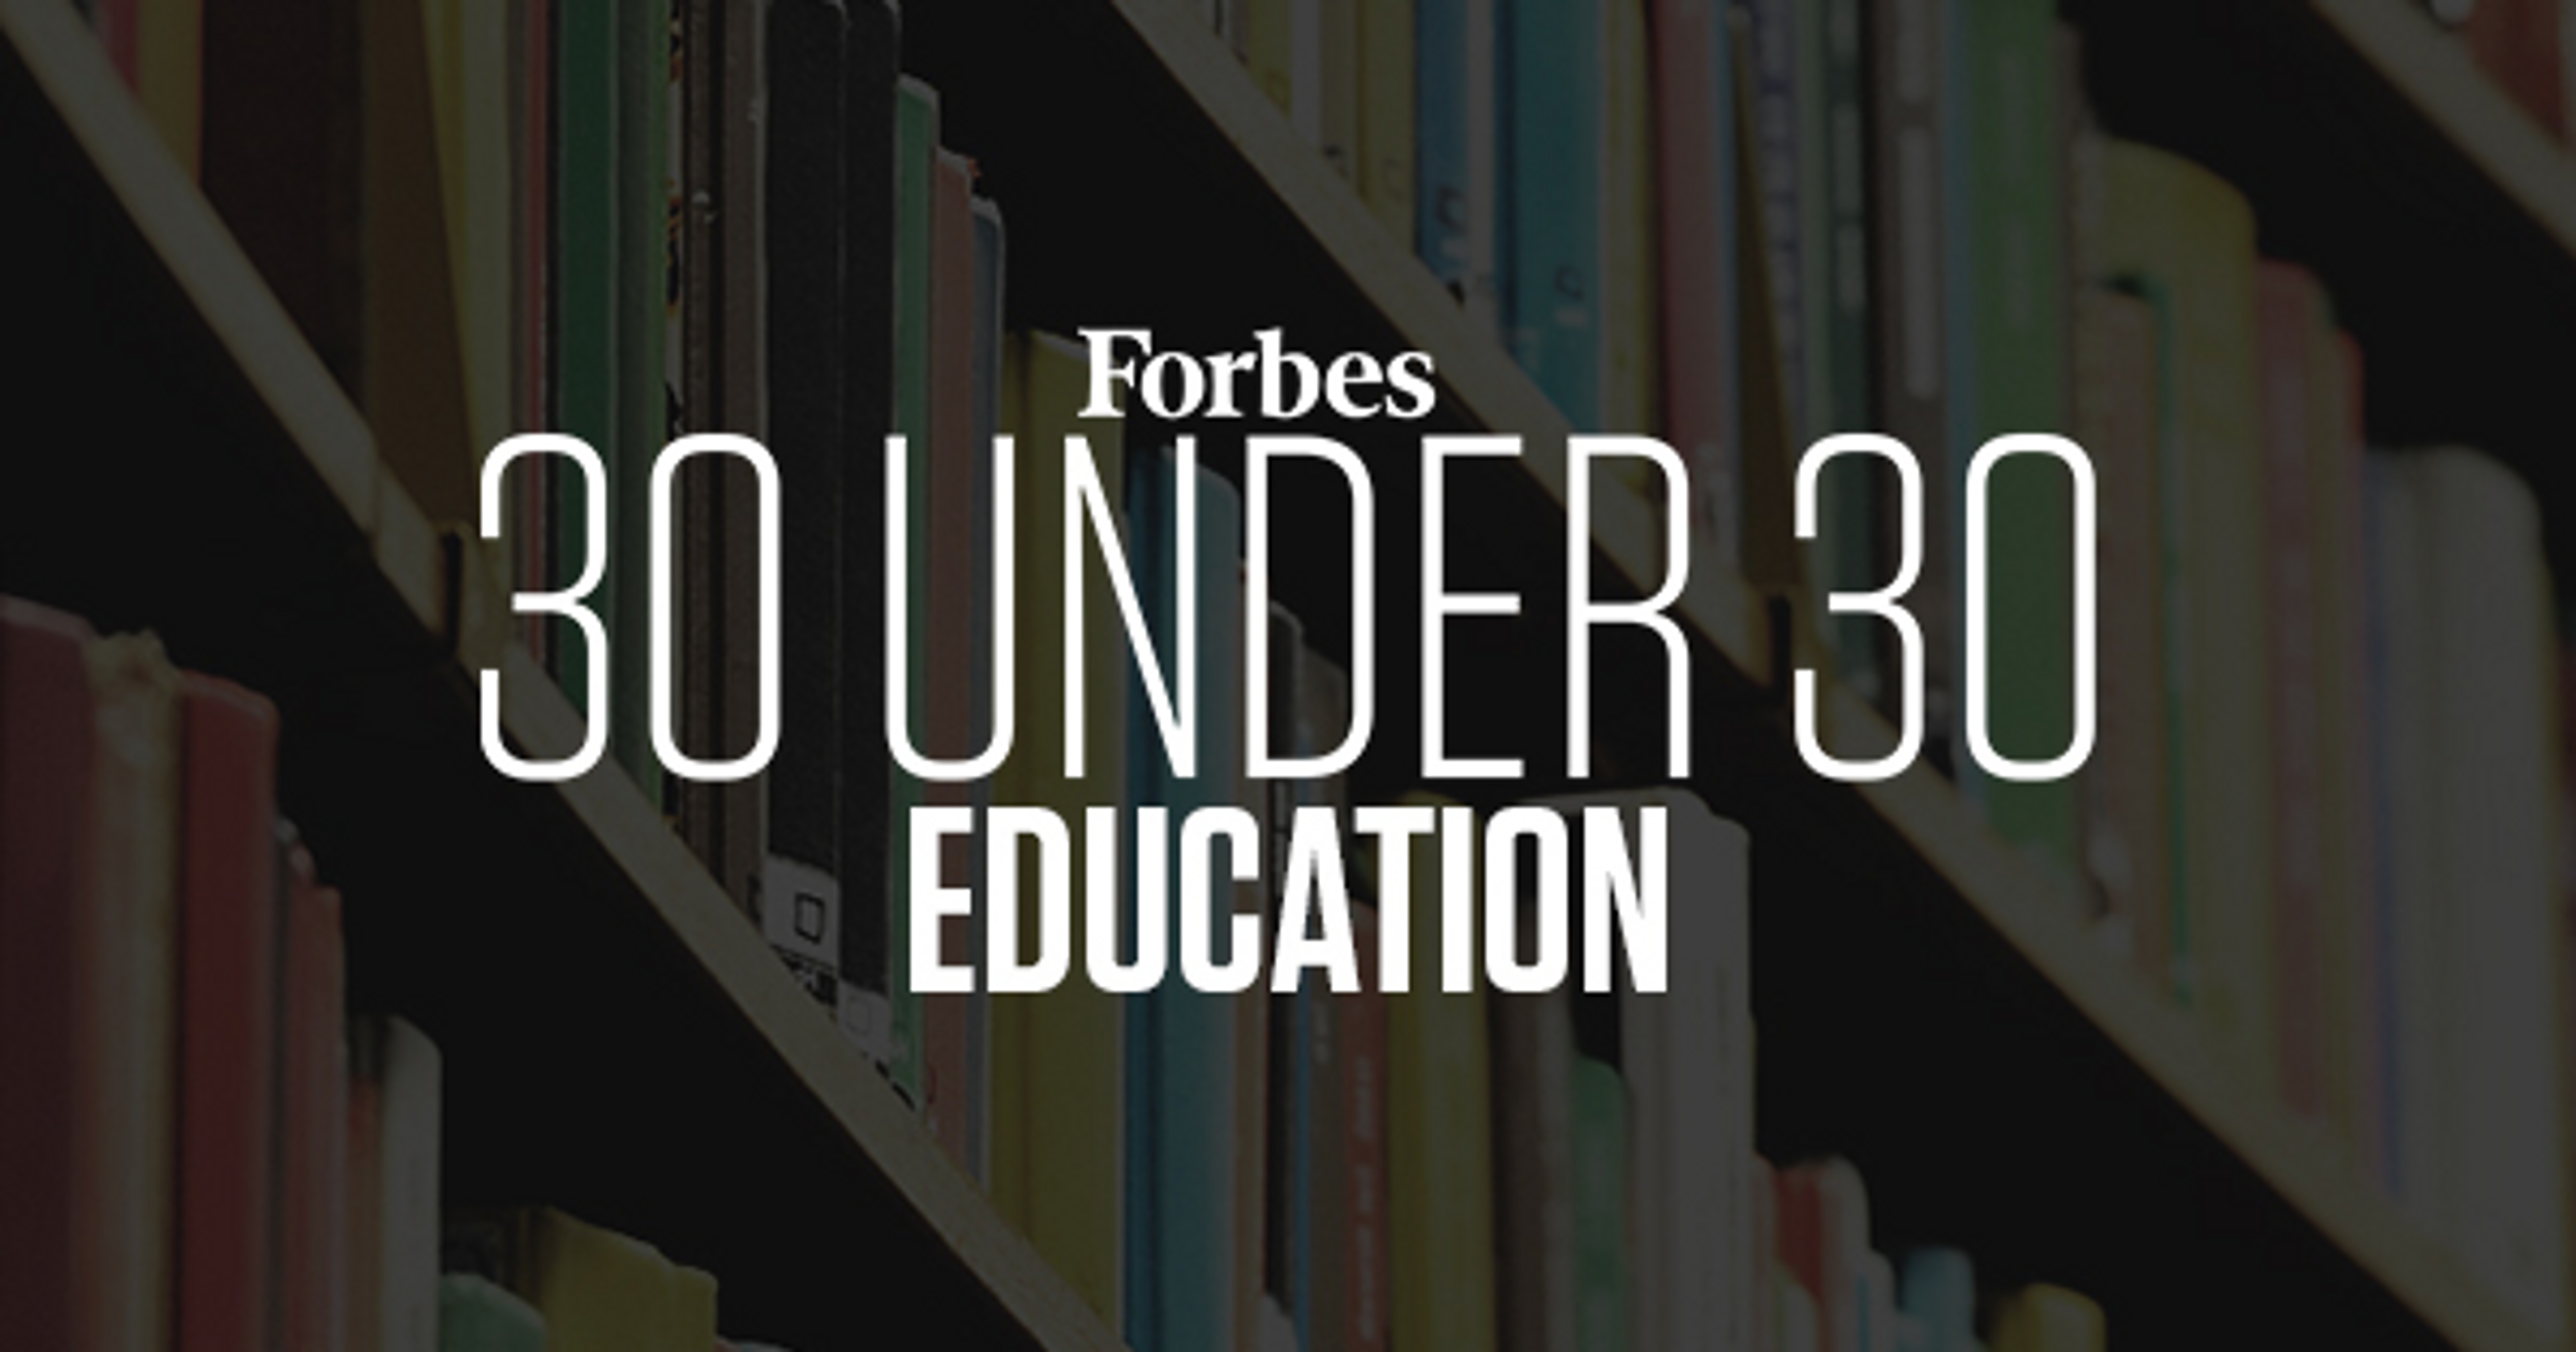 Stride's Founder and CEO Honored on Forbes 30 Under 30 Education 2021 